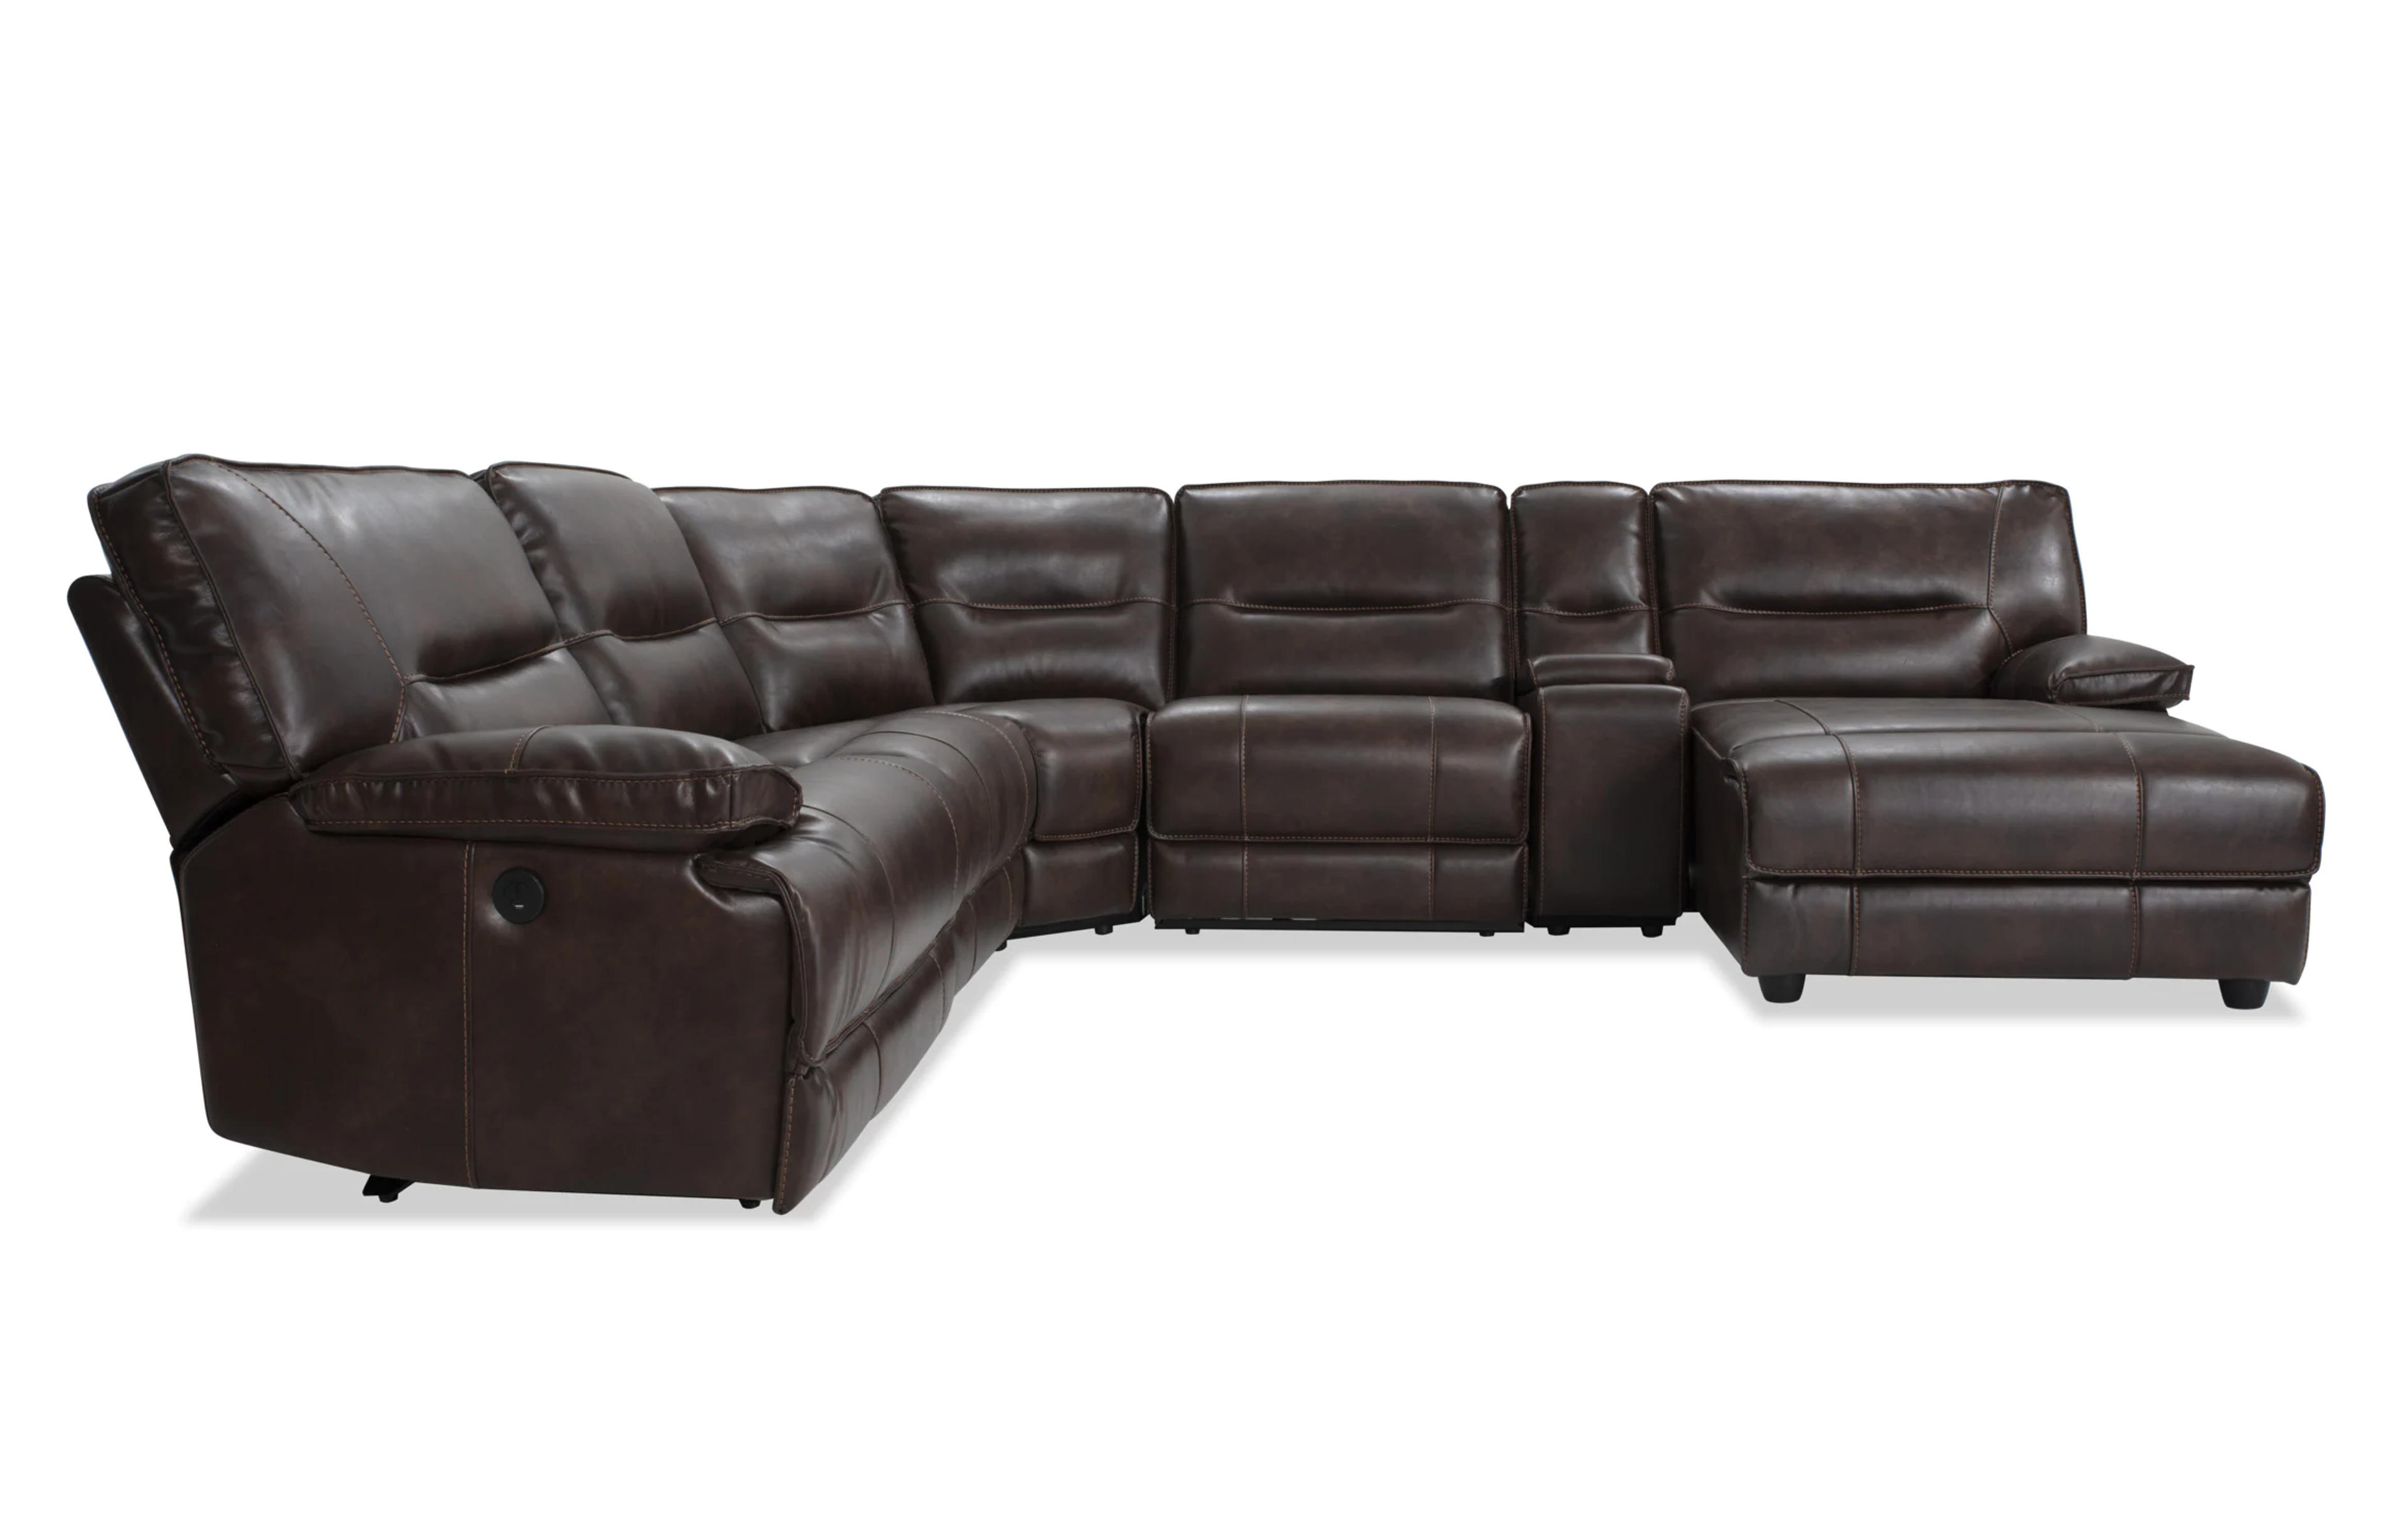 Pacifica Tobacco 130'' 6 Piece Power Right Arm Facing Chaise Sectional | Bob's Discount Furniture